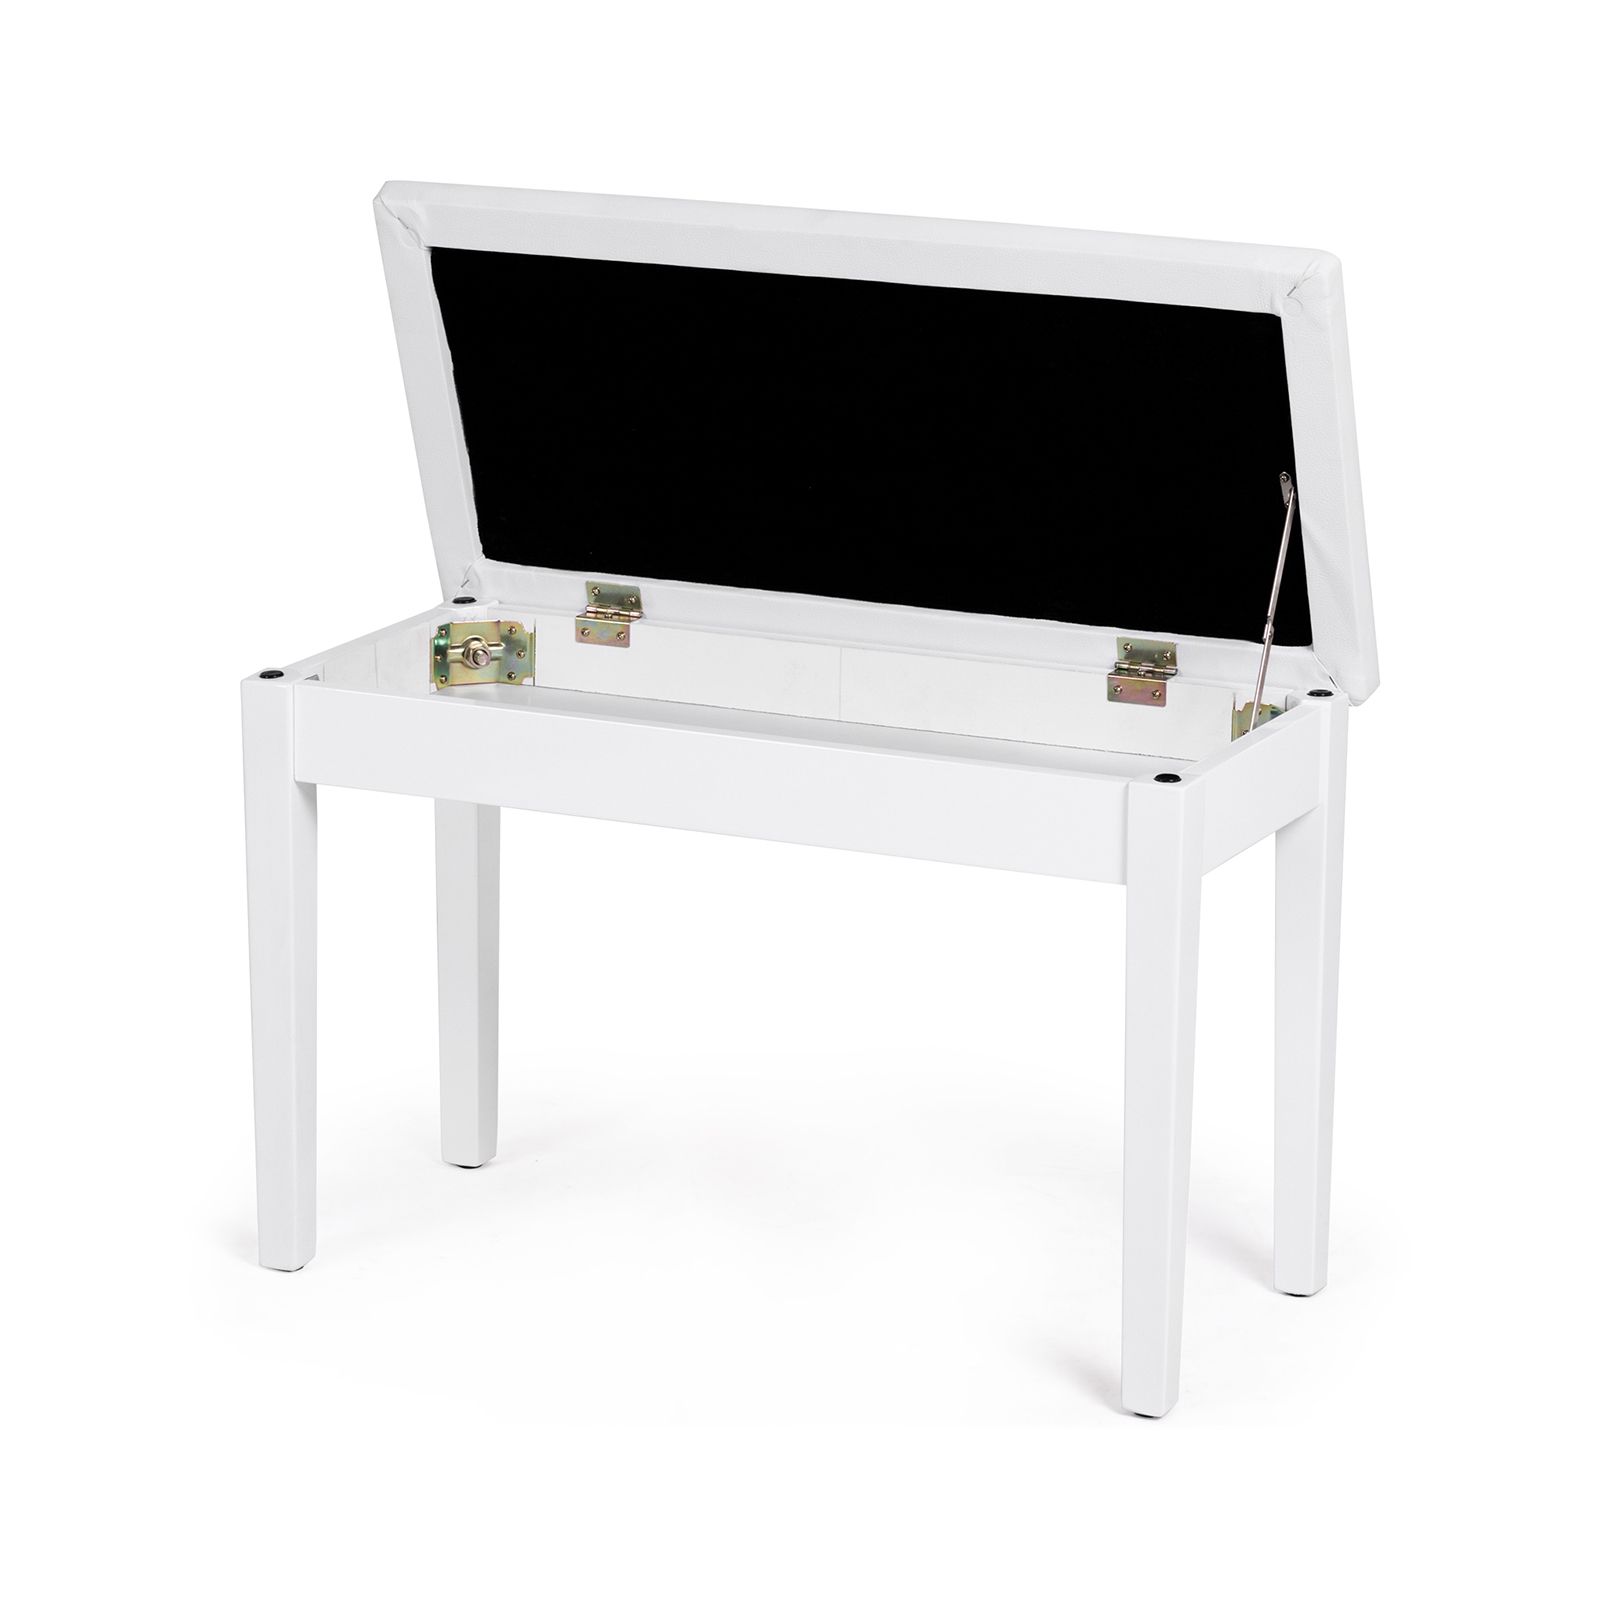 2-in-1 Padded Piano Bench with Storage Space White